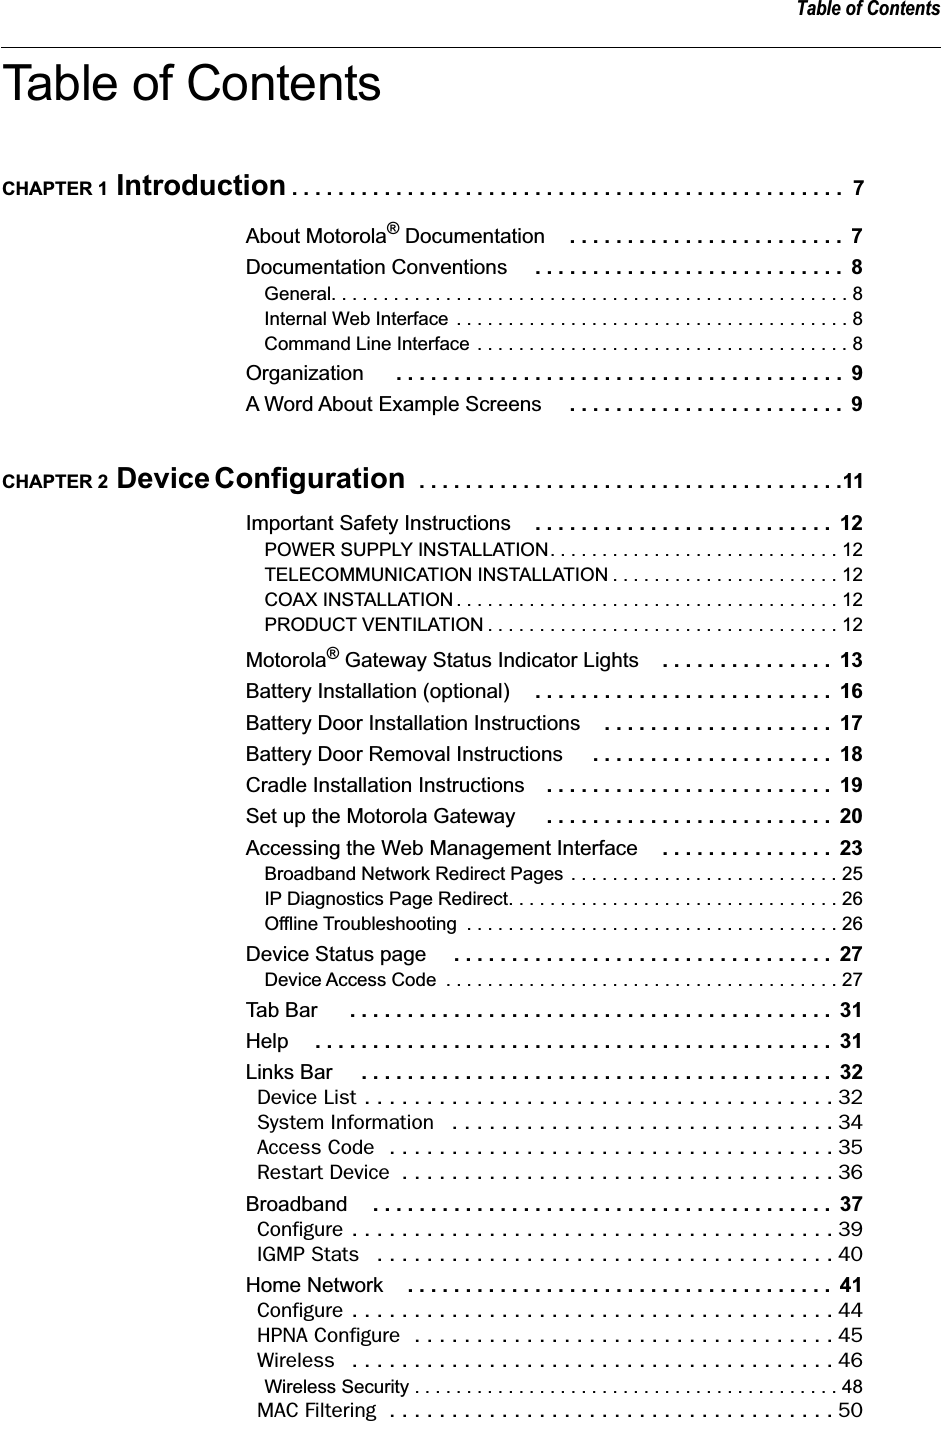  Table of Contents Table of Contents CHAPTER 1  Introduction  . . . . . . . . . . . . . . . . . . . . . . . . . . . . . . . . . . . . . . . . . . . . . . . .  7 About Motorola ®  Documentation . . . . . . . . . . . . . . . . . . . . . . . .  7 Documentation Conventions  . . . . . . . . . . . . . . . . . . . . . . . . . . .  8 General. . . . . . . . . . . . . . . . . . . . . . . . . . . . . . . . . . . . . . . . . . . . . . . . . . 8Internal Web Interface . . . . . . . . . . . . . . . . . . . . . . . . . . . . . . . . . . . . . . 8Command Line Interface . . . . . . . . . . . . . . . . . . . . . . . . . . . . . . . . . . . . 8 Organization  . . . . . . . . . . . . . . . . . . . . . . . . . . . . . . . . . . . . . . .  9 A Word About Example Screens  . . . . . . . . . . . . . . . . . . . . . . . .  9 CHAPTER 2  Device Configuration   . . . . . . . . . . . . . . . . . . . . . . . . . . . . . . . . . . . . .11 Important Safety Instructions . . . . . . . . . . . . . . . . . . . . . . . . . .  12 POWER SUPPLY INSTALLATION. . . . . . . . . . . . . . . . . . . . . . . . . . . . 12TELECOMMUNICATION INSTALLATION . . . . . . . . . . . . . . . . . . . . . . 12COAX INSTALLATION . . . . . . . . . . . . . . . . . . . . . . . . . . . . . . . . . . . . . 12PRODUCT VENTILATION . . . . . . . . . . . . . . . . . . . . . . . . . . . . . . . . . . 12 Motorola ®  Gateway Status Indicator Lights . . . . . . . . . . . . . . .  13 Battery Installation (optional) . . . . . . . . . . . . . . . . . . . . . . . . . .  16 Battery Door Installation Instructions . . . . . . . . . . . . . . . . . . . .  17 Battery Door Removal Instructions  . . . . . . . . . . . . . . . . . . . . .  18 Cradle Installation Instructions . . . . . . . . . . . . . . . . . . . . . . . . .  19 Set up the Motorola Gateway  . . . . . . . . . . . . . . . . . . . . . . . . .  20 Accessing the Web Management Interface . . . . . . . . . . . . . . .  23 Broadband Network Redirect Pages . . . . . . . . . . . . . . . . . . . . . . . . . . 25IP Diagnostics Page Redirect. . . . . . . . . . . . . . . . . . . . . . . . . . . . . . . . 26Offline Troubleshooting  . . . . . . . . . . . . . . . . . . . . . . . . . . . . . . . . . . . . 26 Device Status page  . . . . . . . . . . . . . . . . . . . . . . . . . . . . . . . . .  27 Device Access Code  . . . . . . . . . . . . . . . . . . . . . . . . . . . . . . . . . . . . . . 27 Tab Bar  . . . . . . . . . . . . . . . . . . . . . . . . . . . . . . . . . . . . . . . . . .  31 Help . . . . . . . . . . . . . . . . . . . . . . . . . . . . . . . . . . . . . . . . . . . . .  31 Links Bar  . . . . . . . . . . . . . . . . . . . . . . . . . . . . . . . . . . . . . . . . .  32 Device List . . . . . . . . . . . . . . . . . . . . . . . . . . . . . . . . . . . . . . 32System Information   . . . . . . . . . . . . . . . . . . . . . . . . . . . . . . . 34Access Code  . . . . . . . . . . . . . . . . . . . . . . . . . . . . . . . . . . . . 35Restart Device  . . . . . . . . . . . . . . . . . . . . . . . . . . . . . . . . . . . 36 Broadband . . . . . . . . . . . . . . . . . . . . . . . . . . . . . . . . . . . . . . . .  37 Configure . . . . . . . . . . . . . . . . . . . . . . . . . . . . . . . . . . . . . . . 39IGMP Stats   . . . . . . . . . . . . . . . . . . . . . . . . . . . . . . . . . . . . . 40 Home Network . . . . . . . . . . . . . . . . . . . . . . . . . . . . . . . . . . . . .  41 Configure . . . . . . . . . . . . . . . . . . . . . . . . . . . . . . . . . . . . . . . 44HPNA Configure  . . . . . . . . . . . . . . . . . . . . . . . . . . . . . . . . . . 45Wireless   . . . . . . . . . . . . . . . . . . . . . . . . . . . . . . . . . . . . . . . 46 Wireless Security . . . . . . . . . . . . . . . . . . . . . . . . . . . . . . . . . . . . . . . . . 48 MAC Filtering  . . . . . . . . . . . . . . . . . . . . . . . . . . . . . . . . . . . . 50